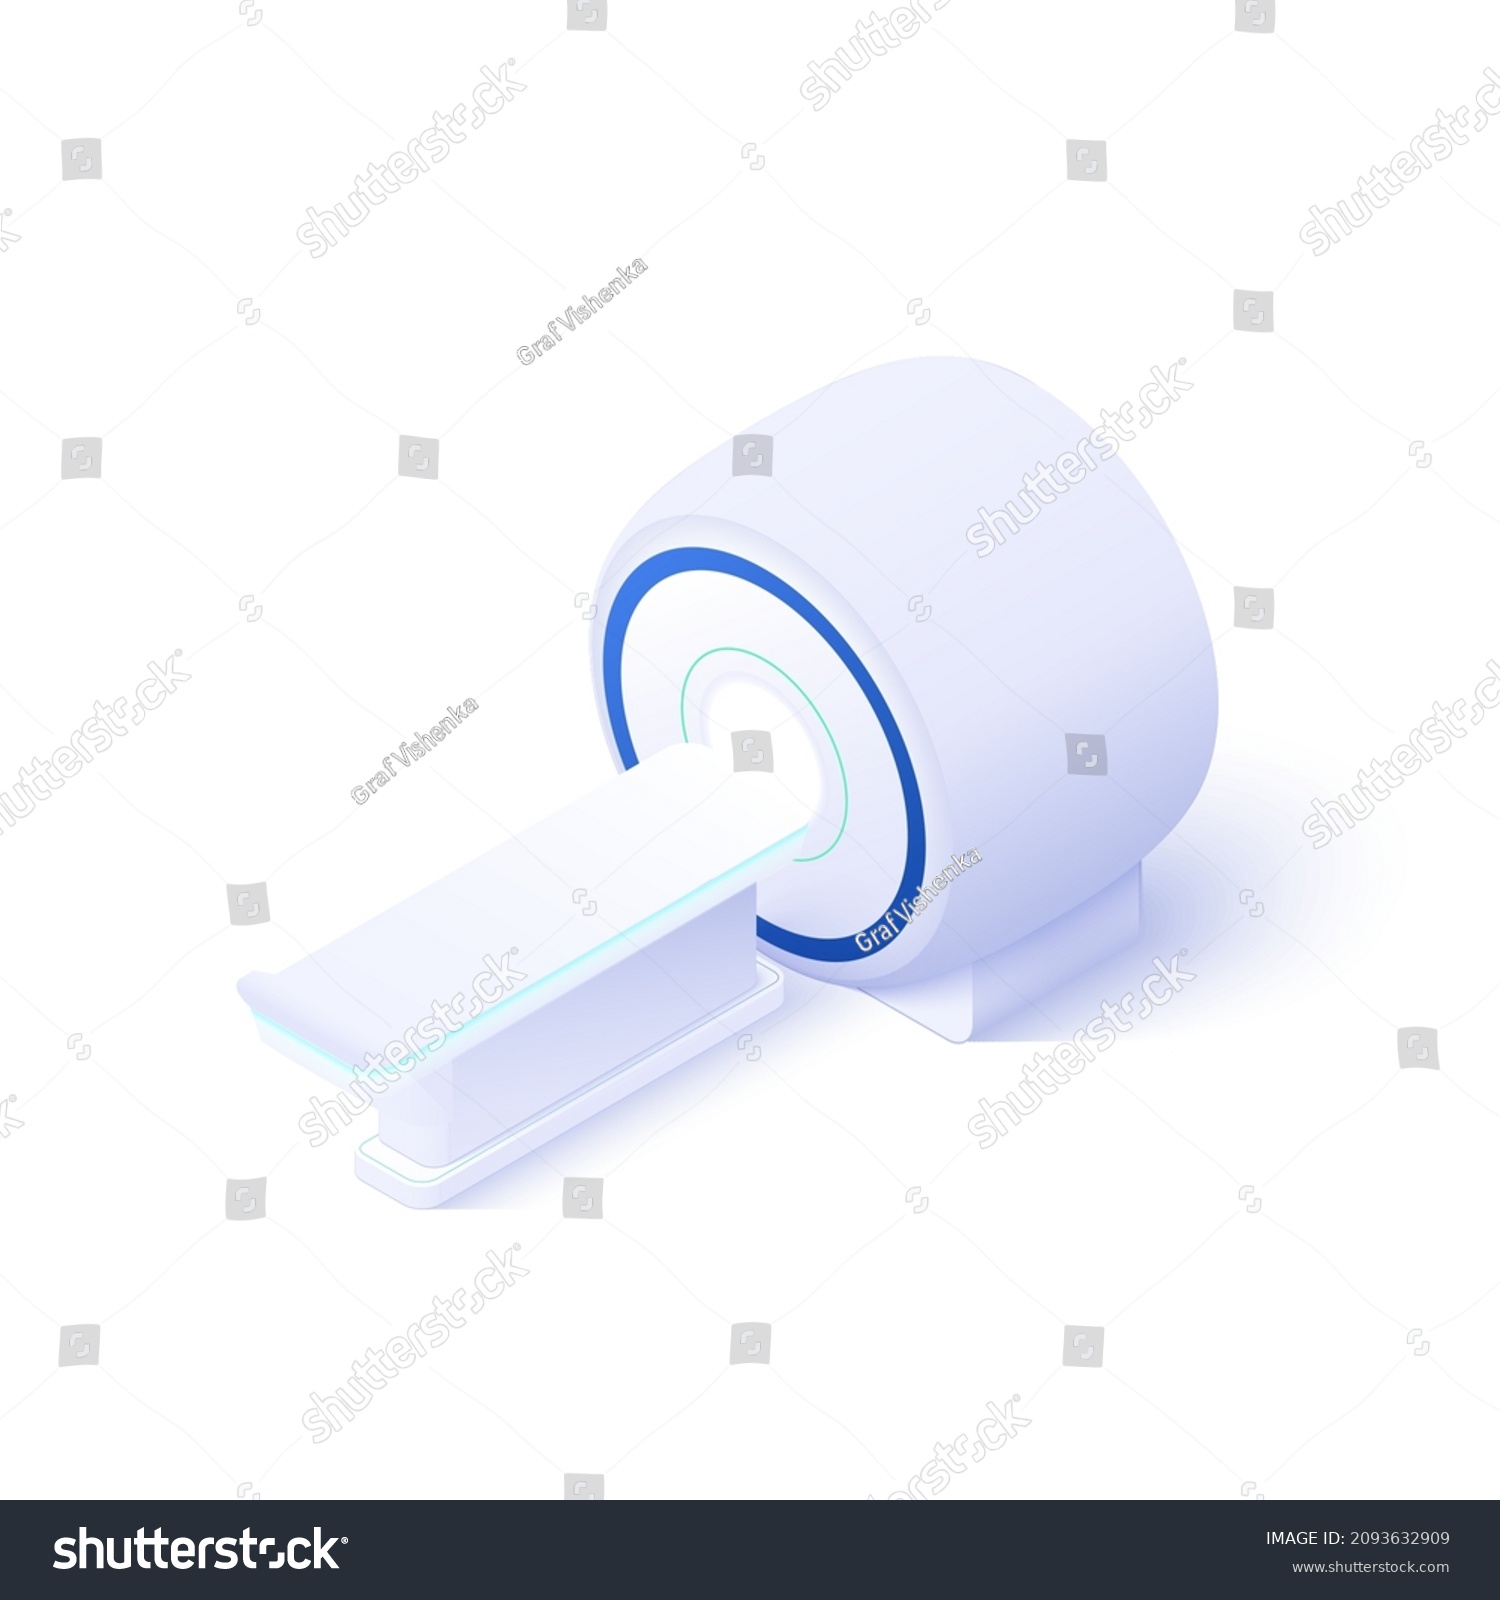 SVG of Magnetic resonance imaging concept in isometric vector design. Mri scan machine or equipment isolated on white background. Web banner layout template svg